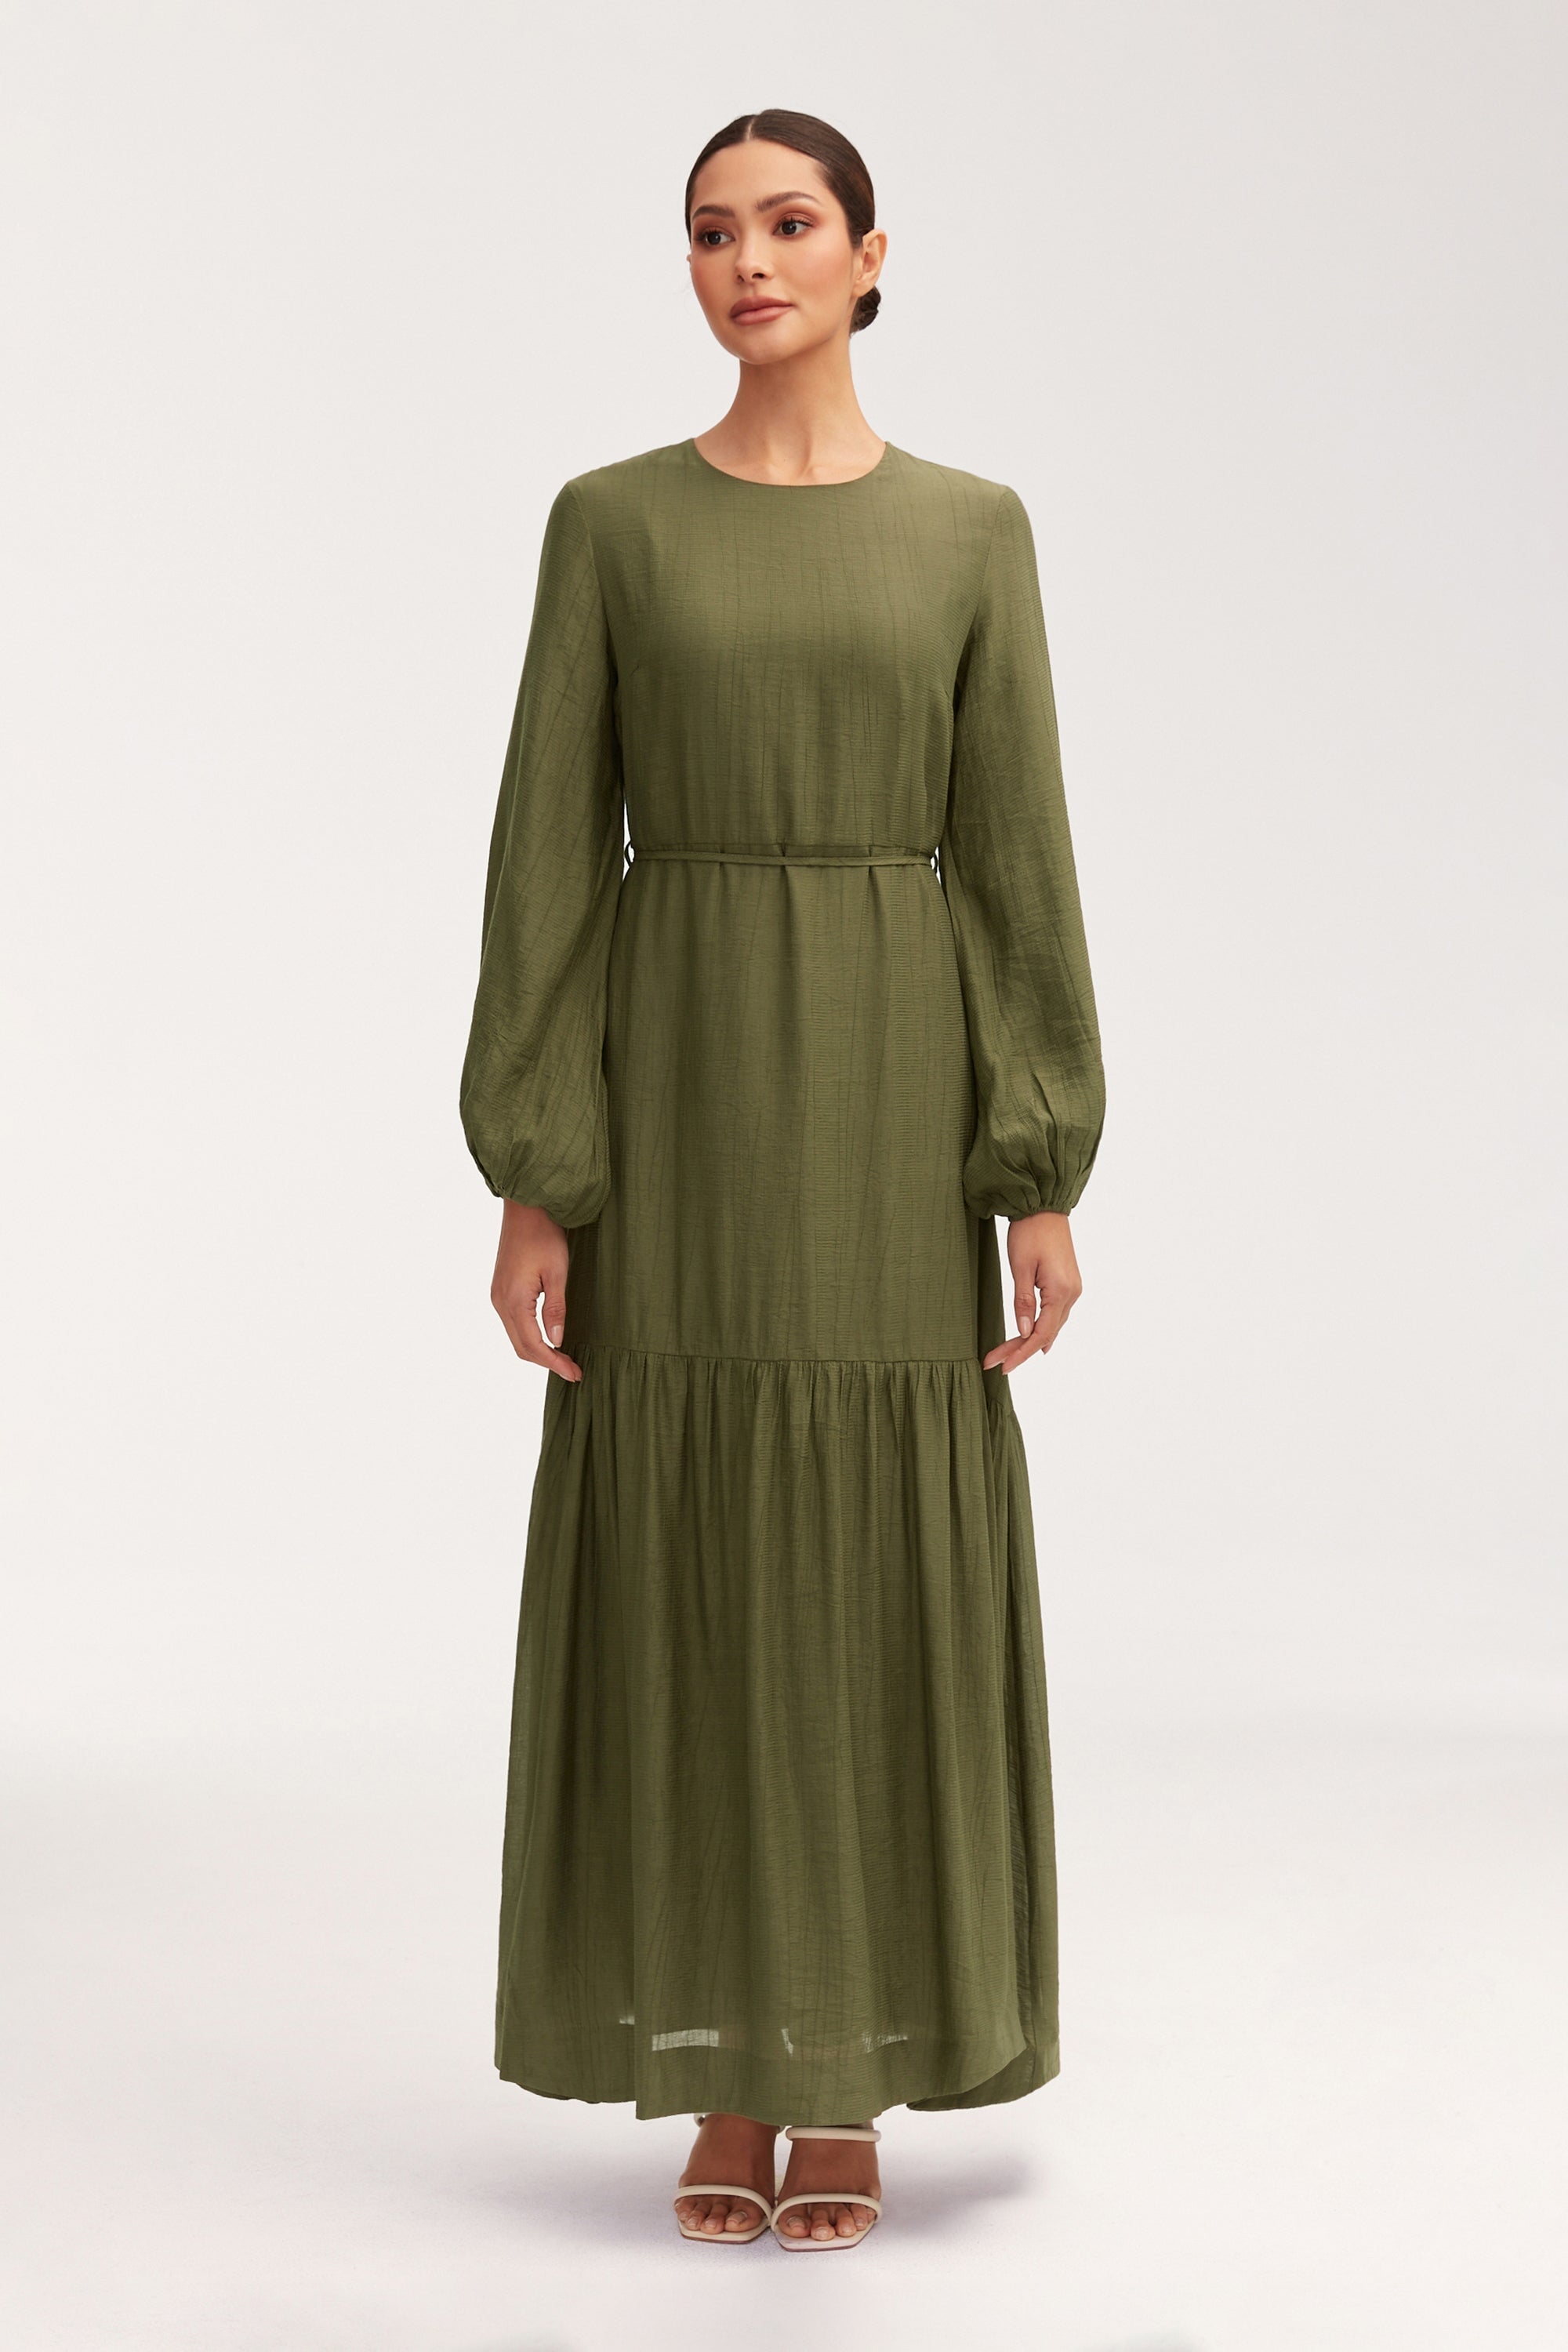 Mila Tiered Maxi Dress - Olive Green Clothing epschoolboard 